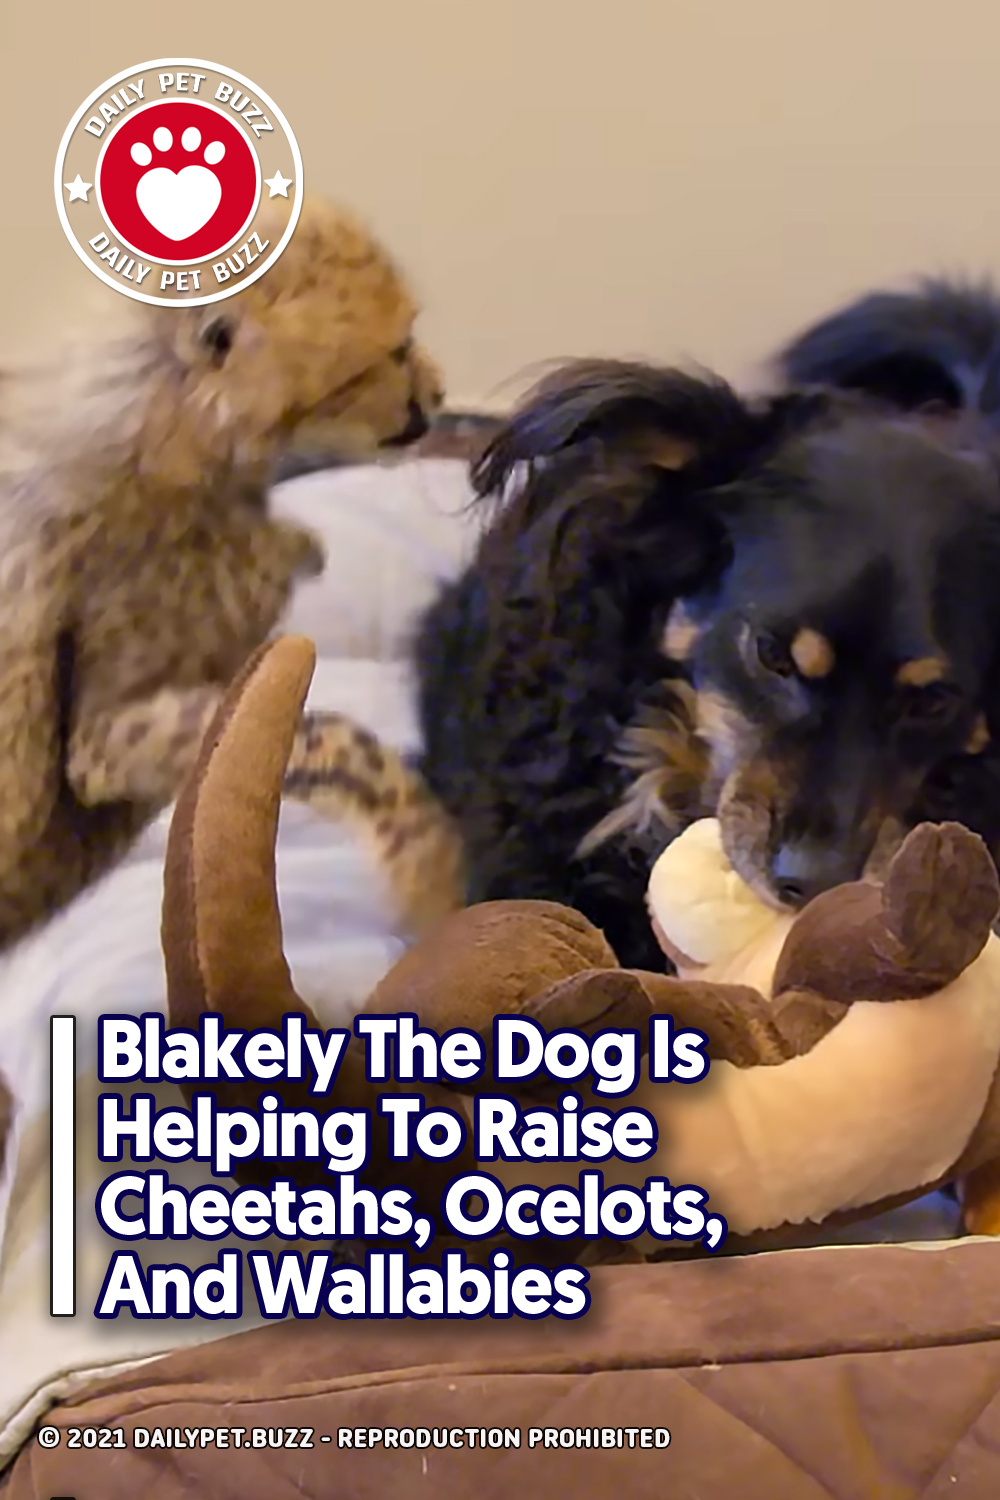 Blakely The Dog Is Helping To Raise Cheetahs, Ocelots, And Wallabies